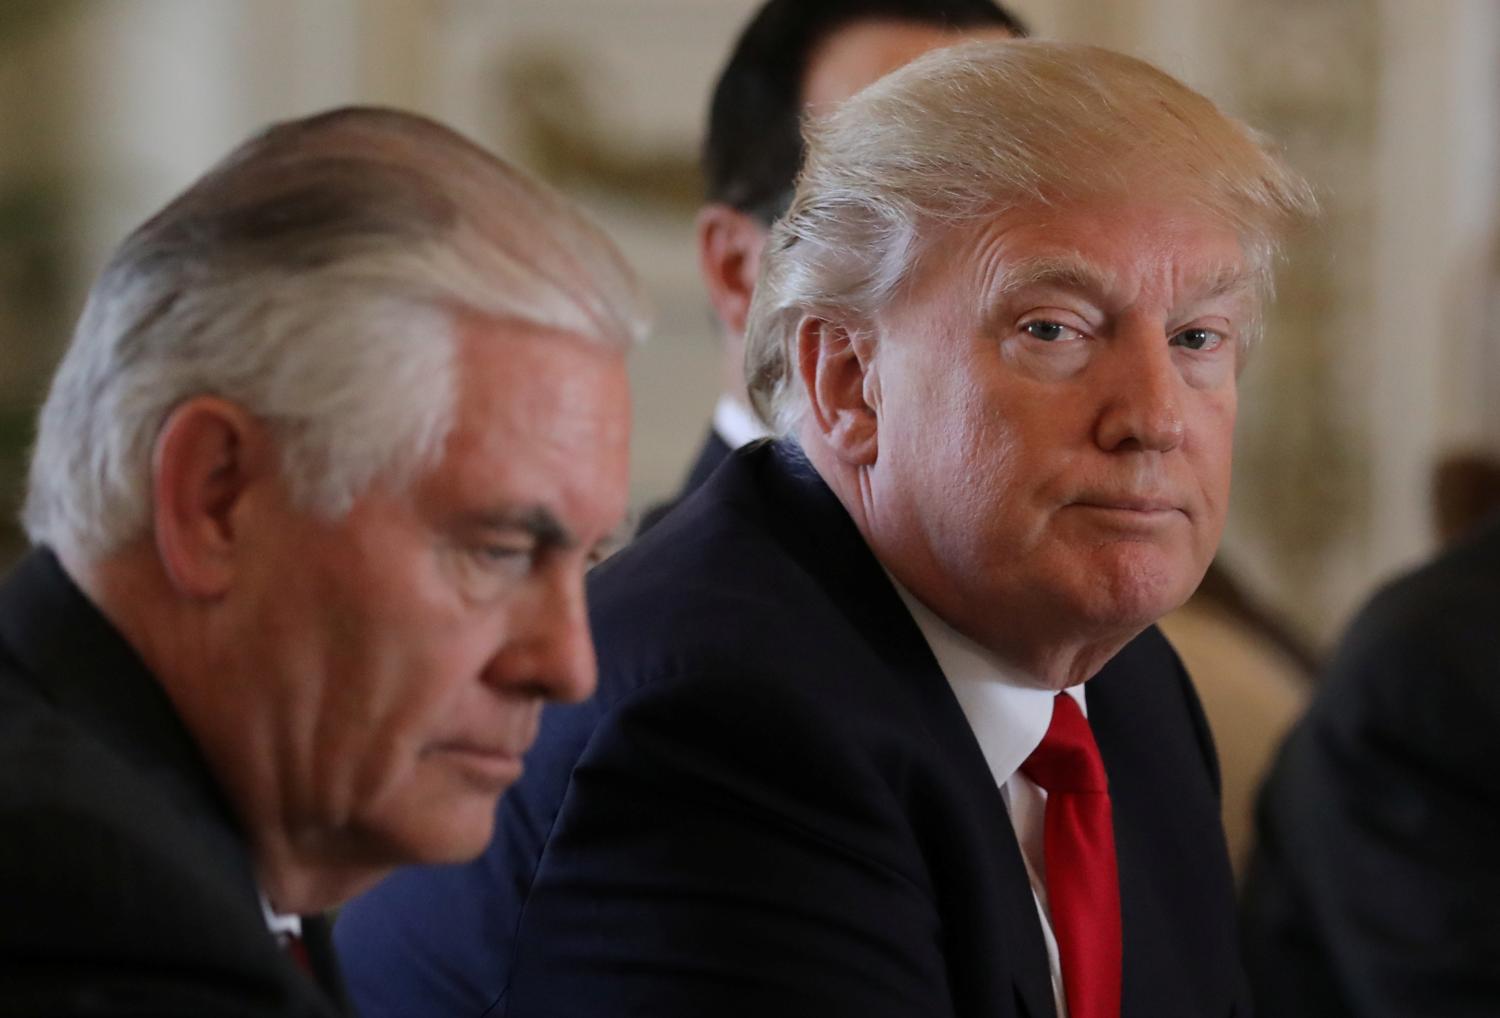 U.S. President Donald Trump (R) sits next to Secretary of State Rex Tillerson during a bilateral meeting with China's President Xi Jinping (Not Pictured) at Trump's Mar-a-Lago estate in Palm Beach, Florida, U.S., April 7, 2017. - RTX34MB6